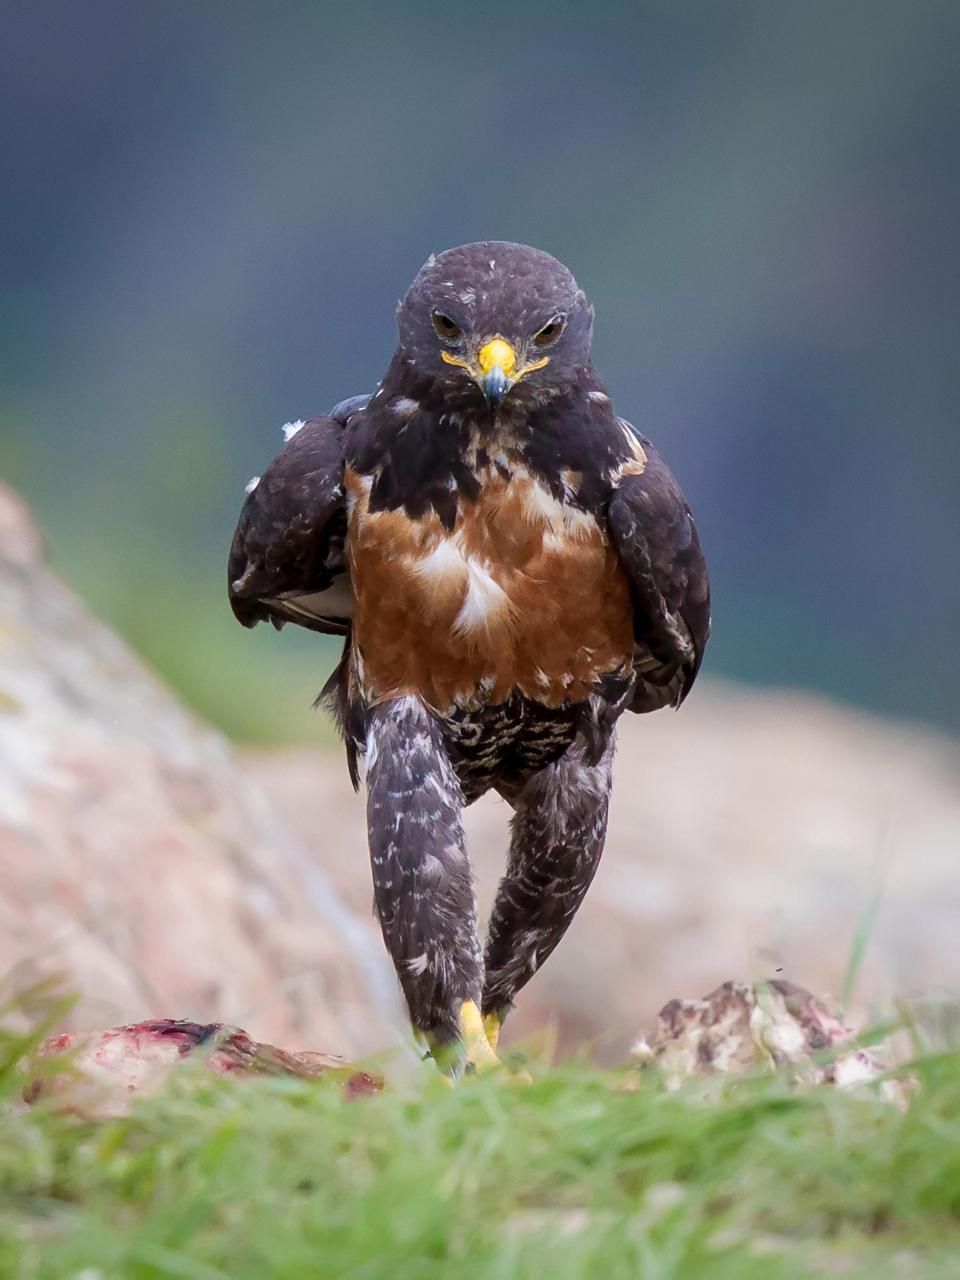 This bird looks like he is coming over to kick my ass.